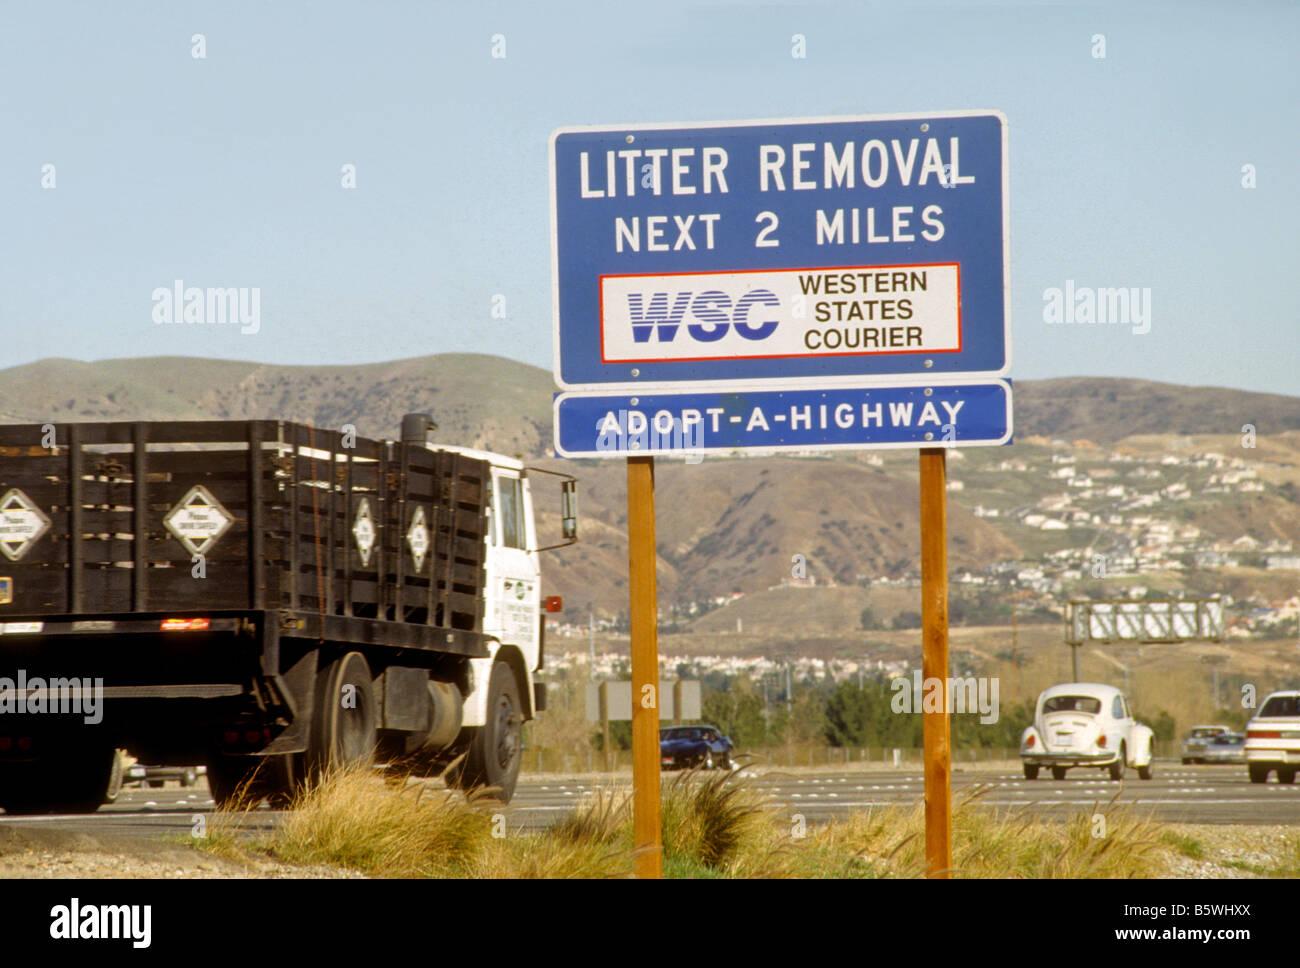 Litter removal public service sign on highway Stock Photo